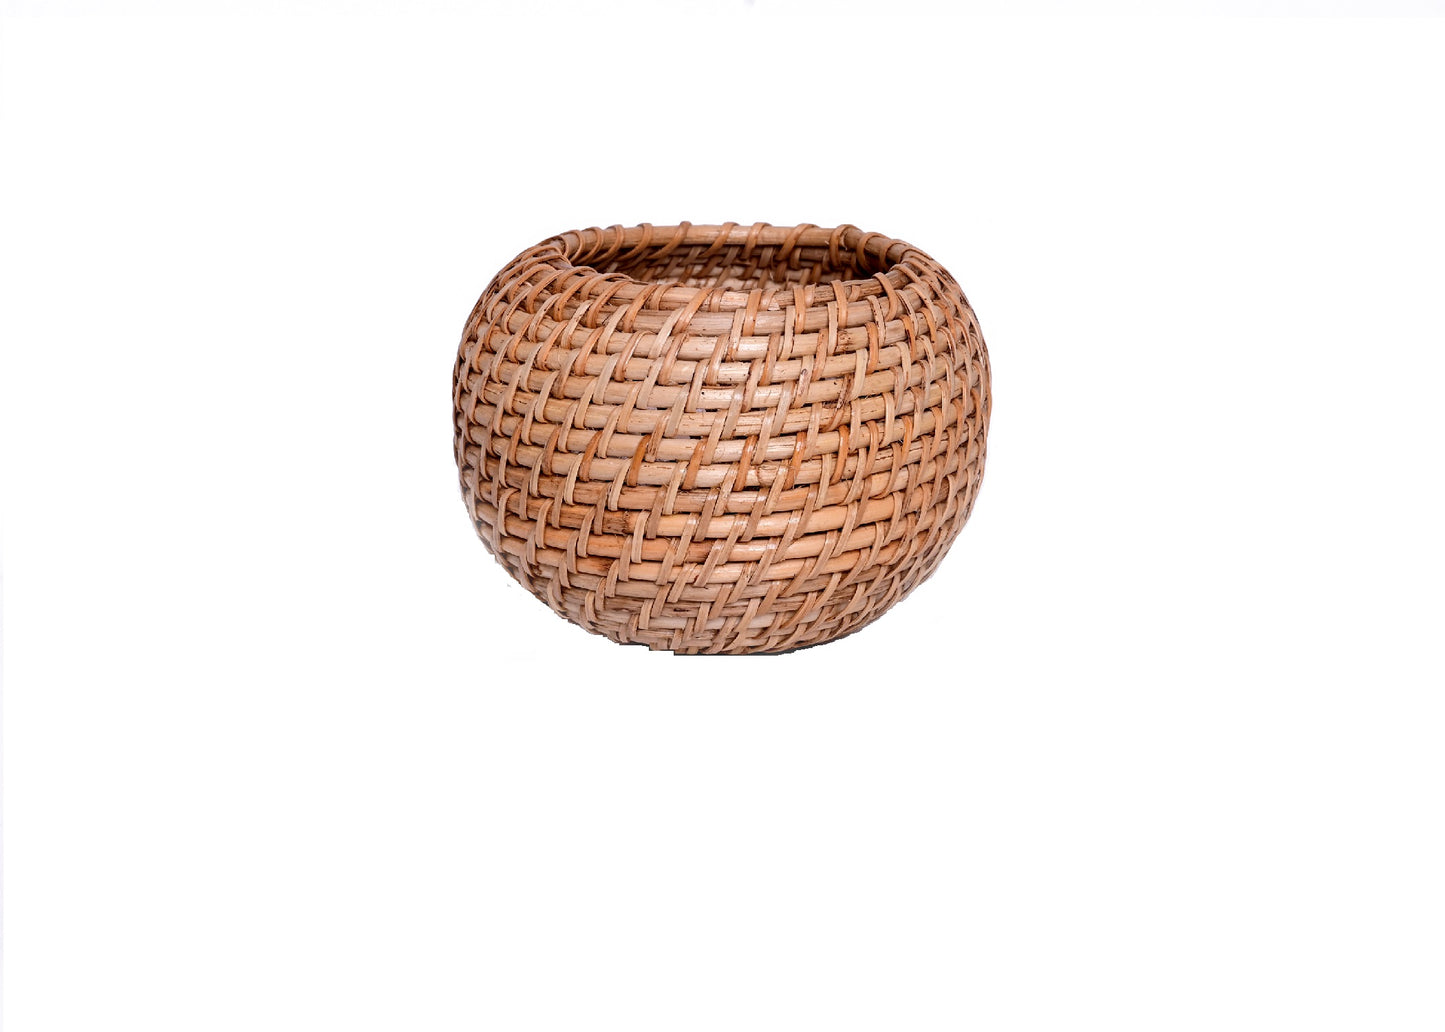 The Weaver's Nest Handmade Natural Cane Planter with macrame hanging for Home, Offices, Restaurants, Garden, Cafe, Balcony, Living Room